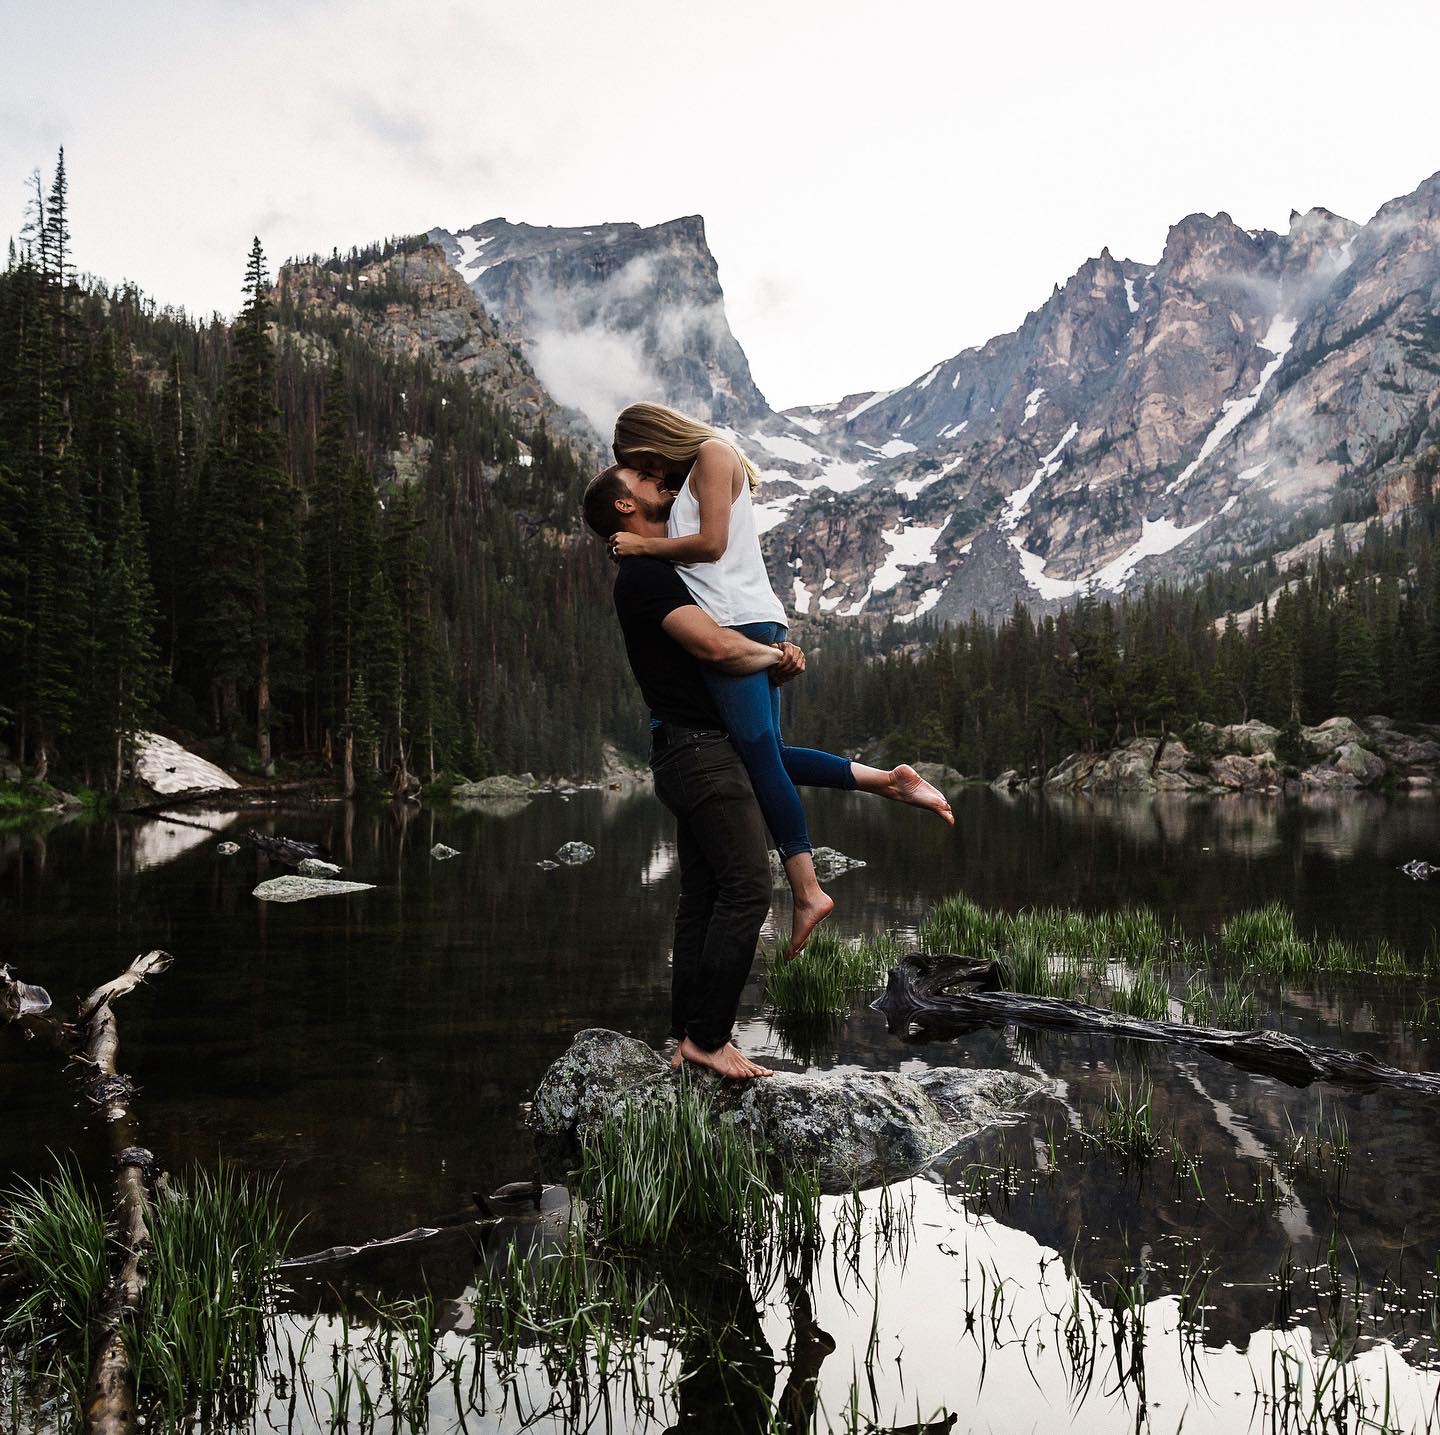 man standing on a rock in the water picking up woman with mountain landscape 